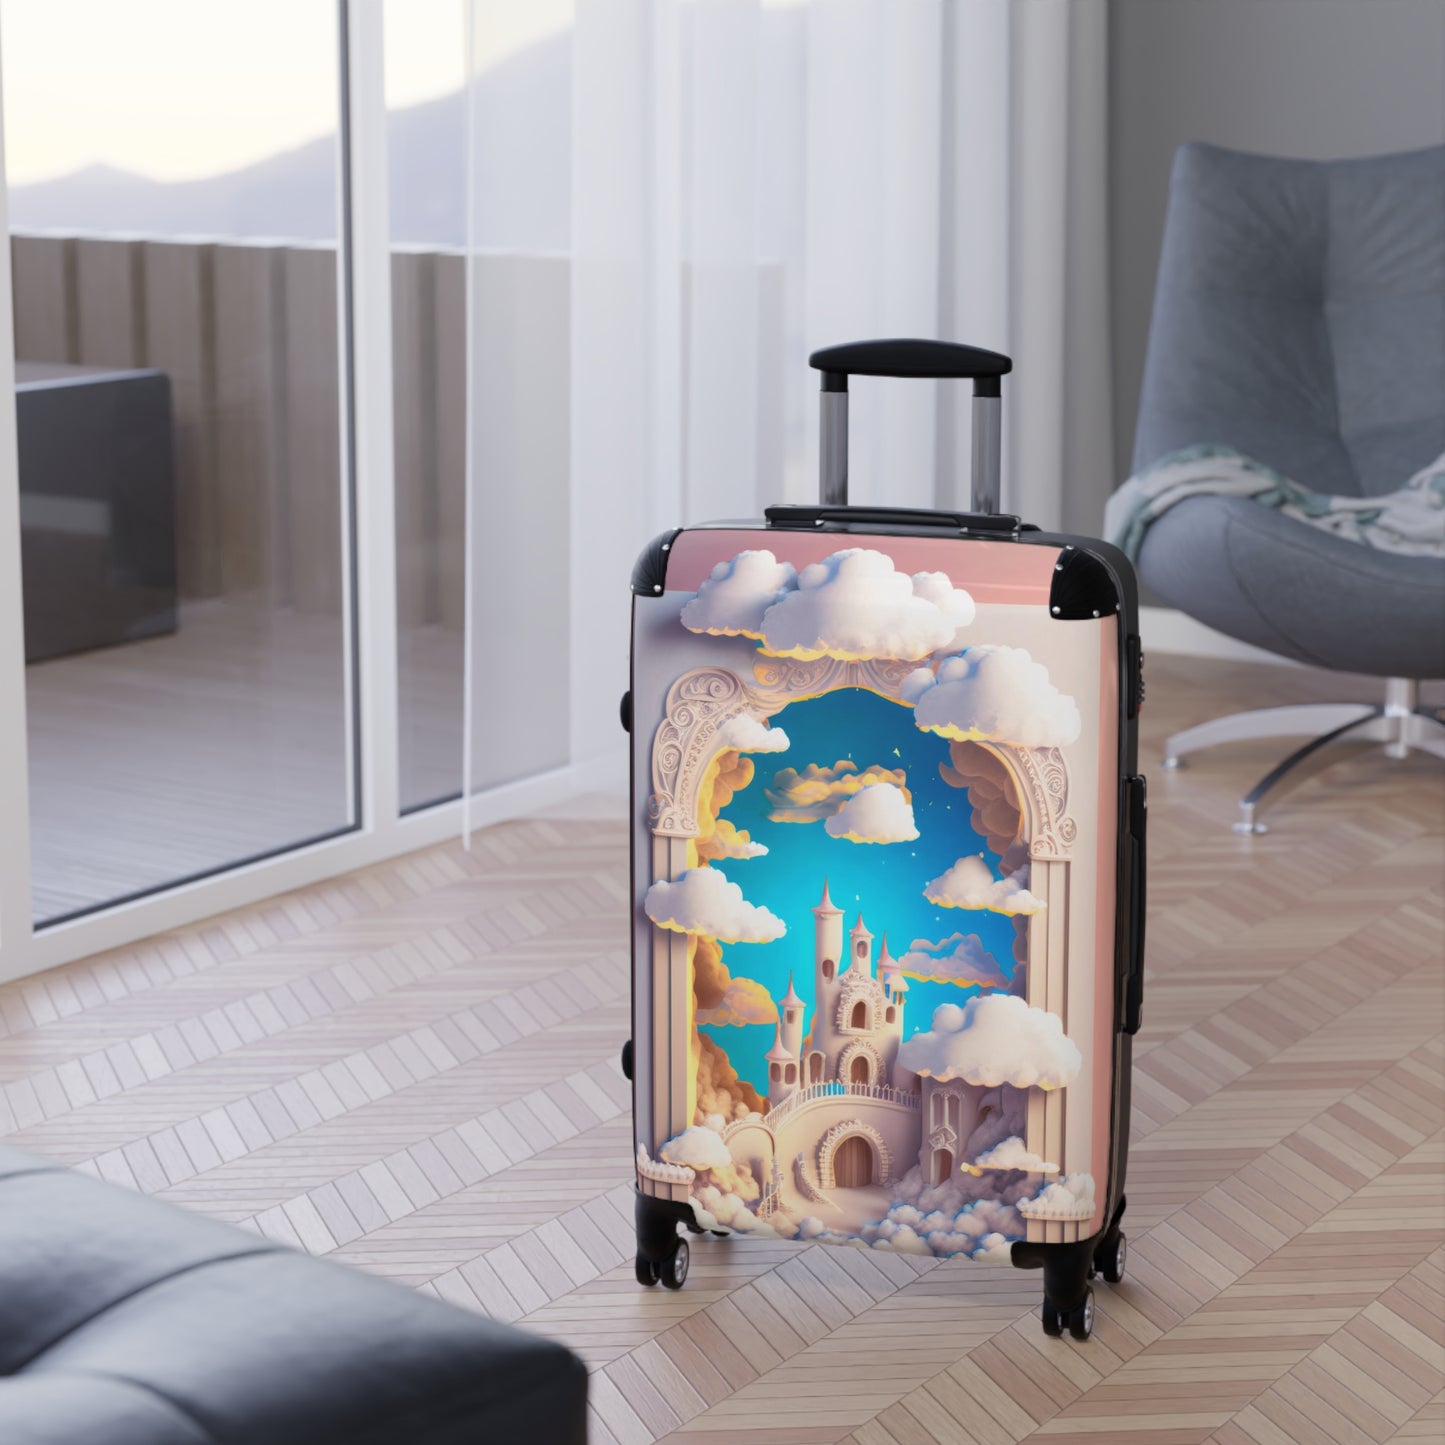 Niccie's Magical 3D Enchanted Disney Palace Suitcase Fantasy Travel Gear